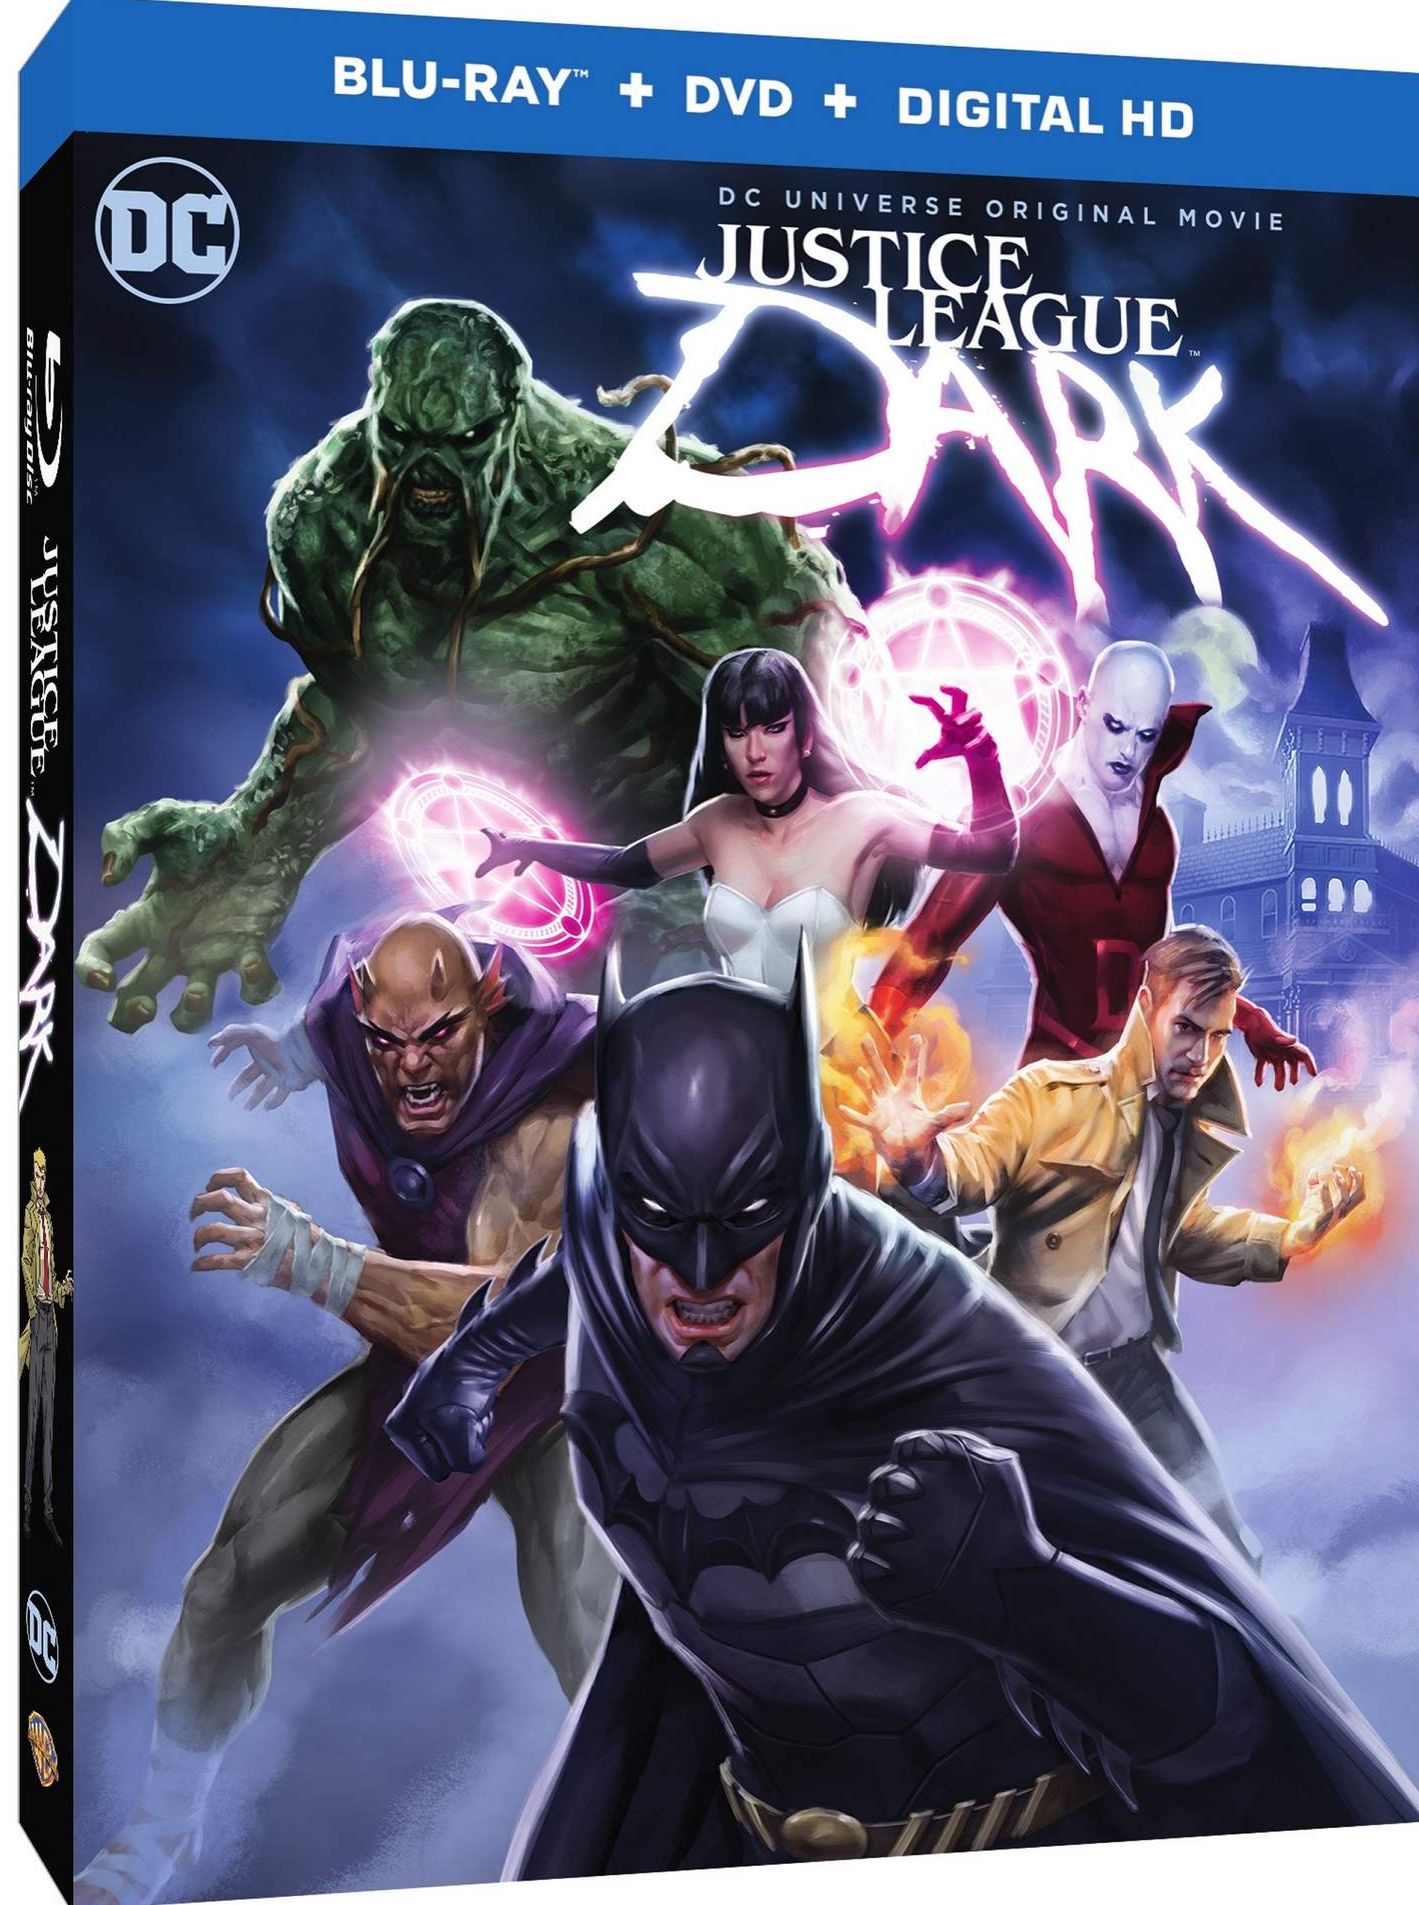 Stunning box art revealed for &#039;Justice League Dark&#039;